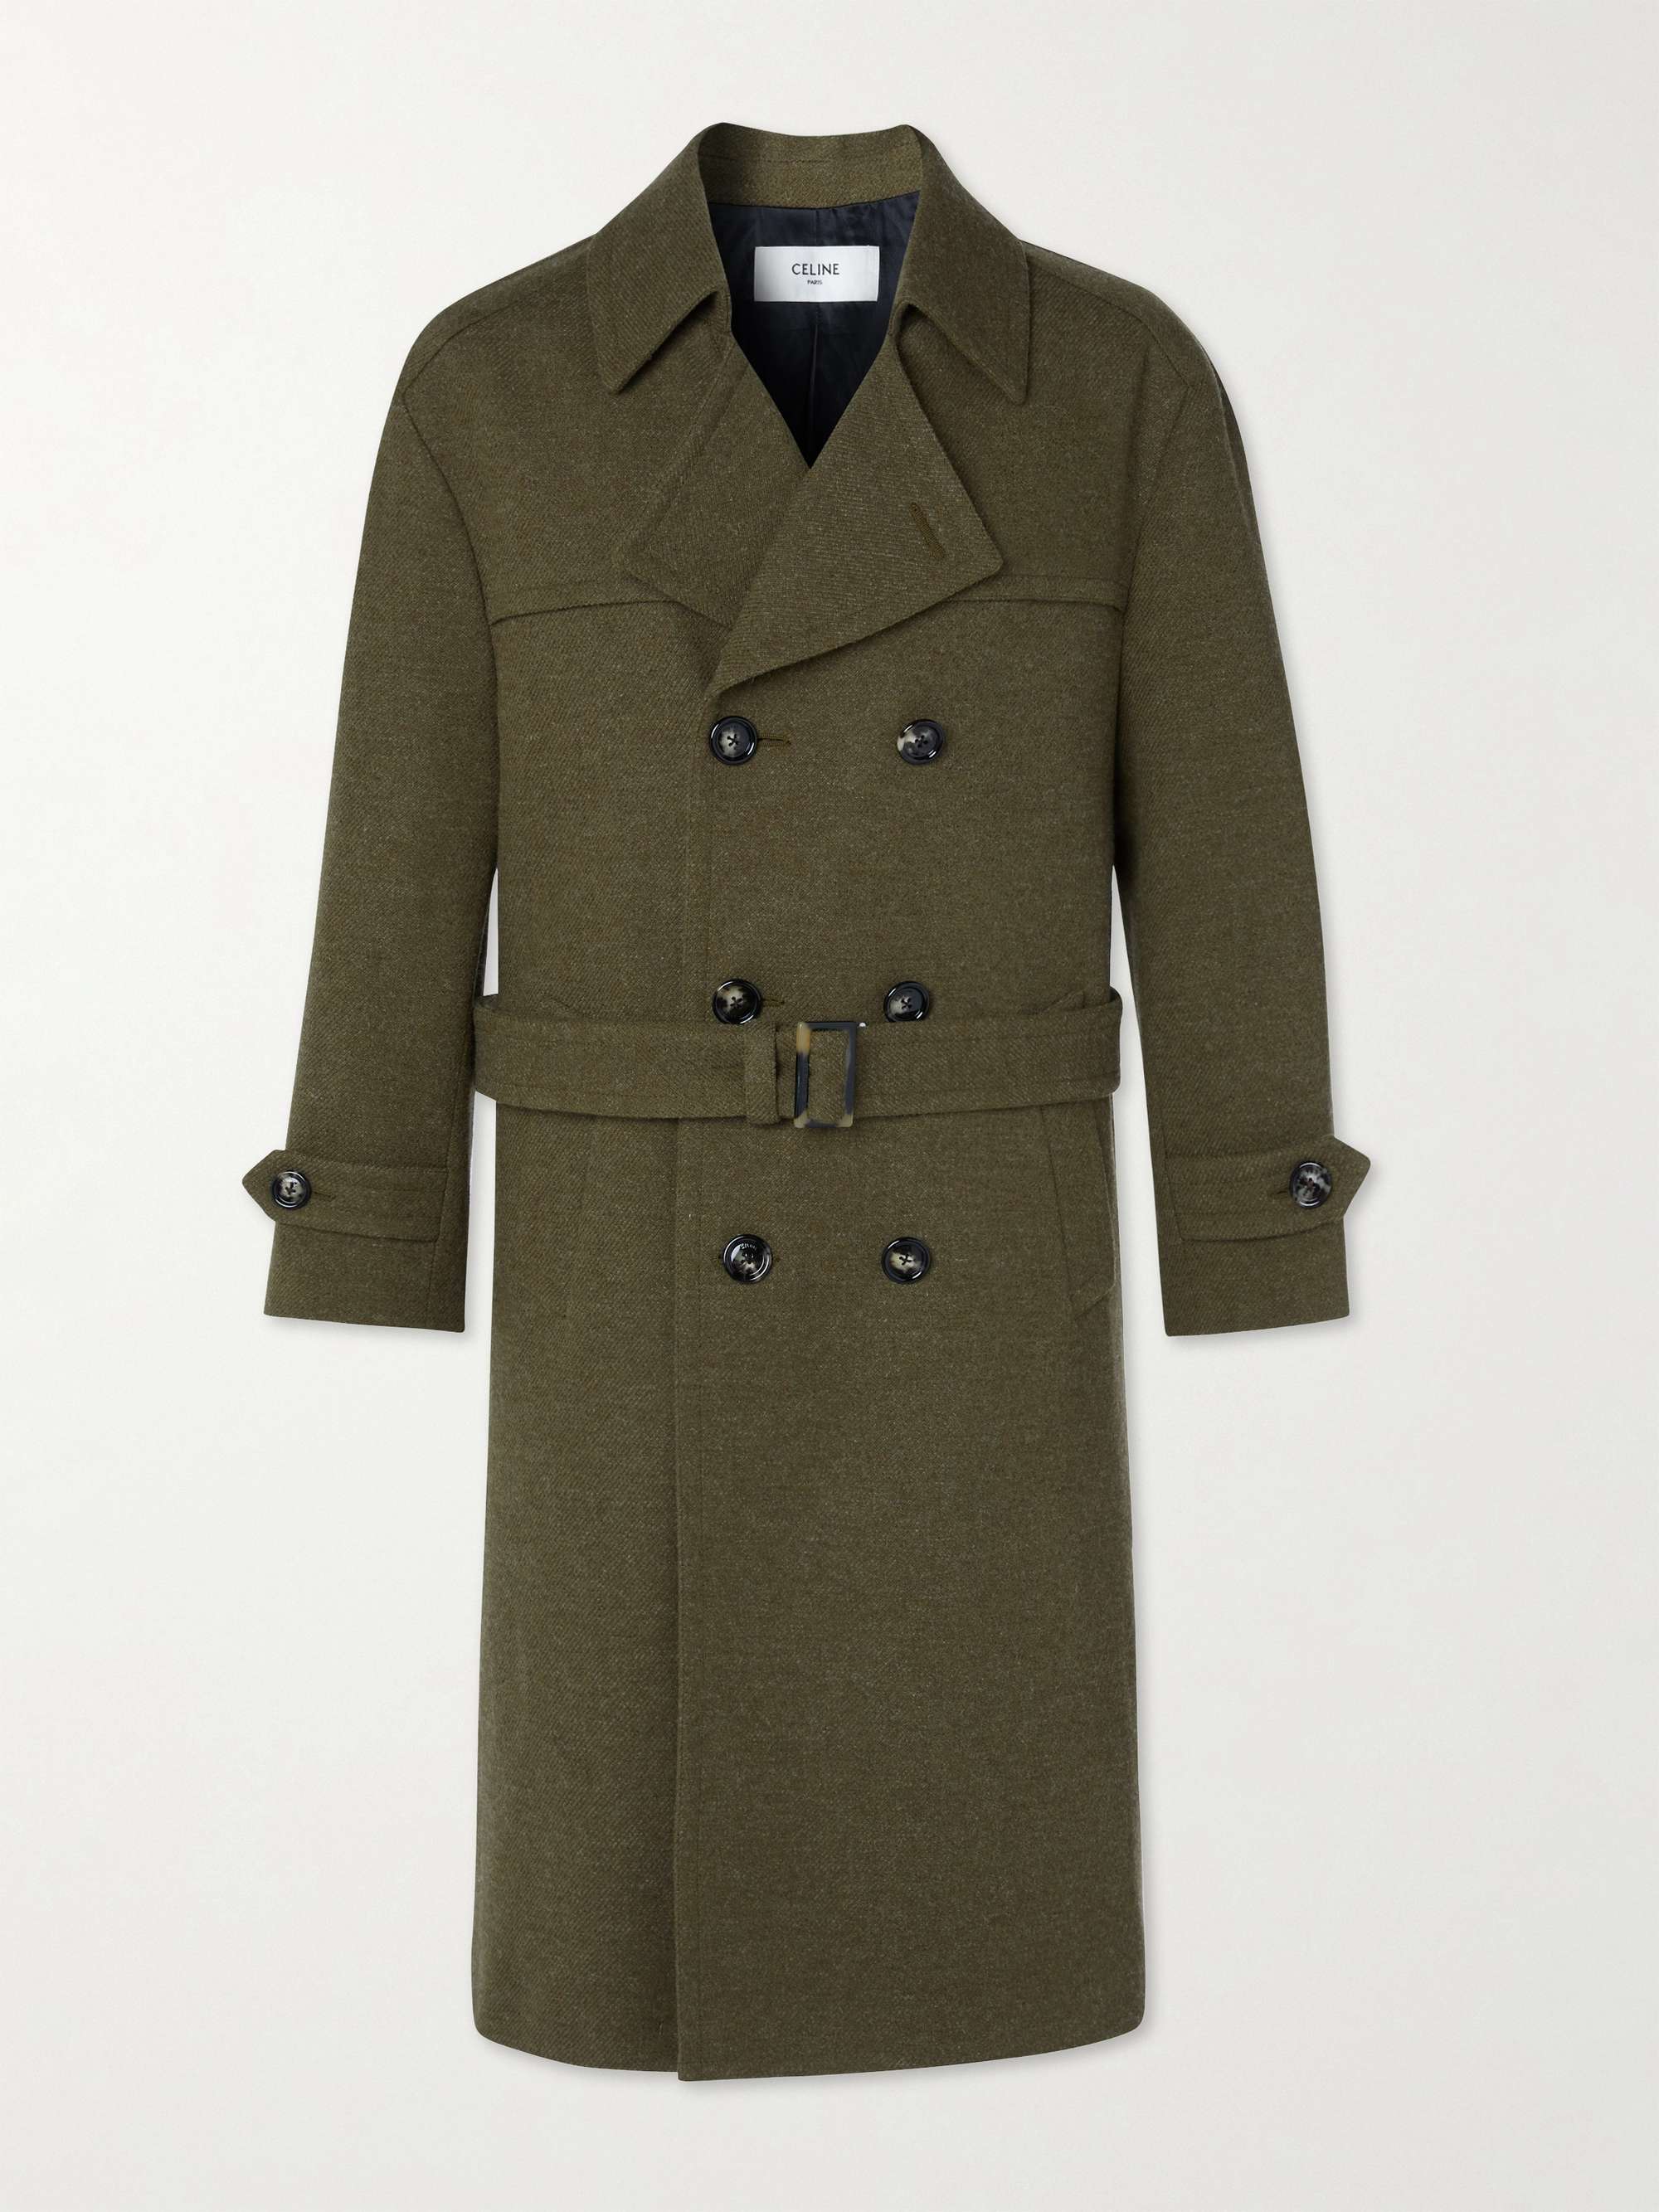 Green Oversized Double-Breasted Wool Trench Coat | CELINE HOMME | MR PORTER